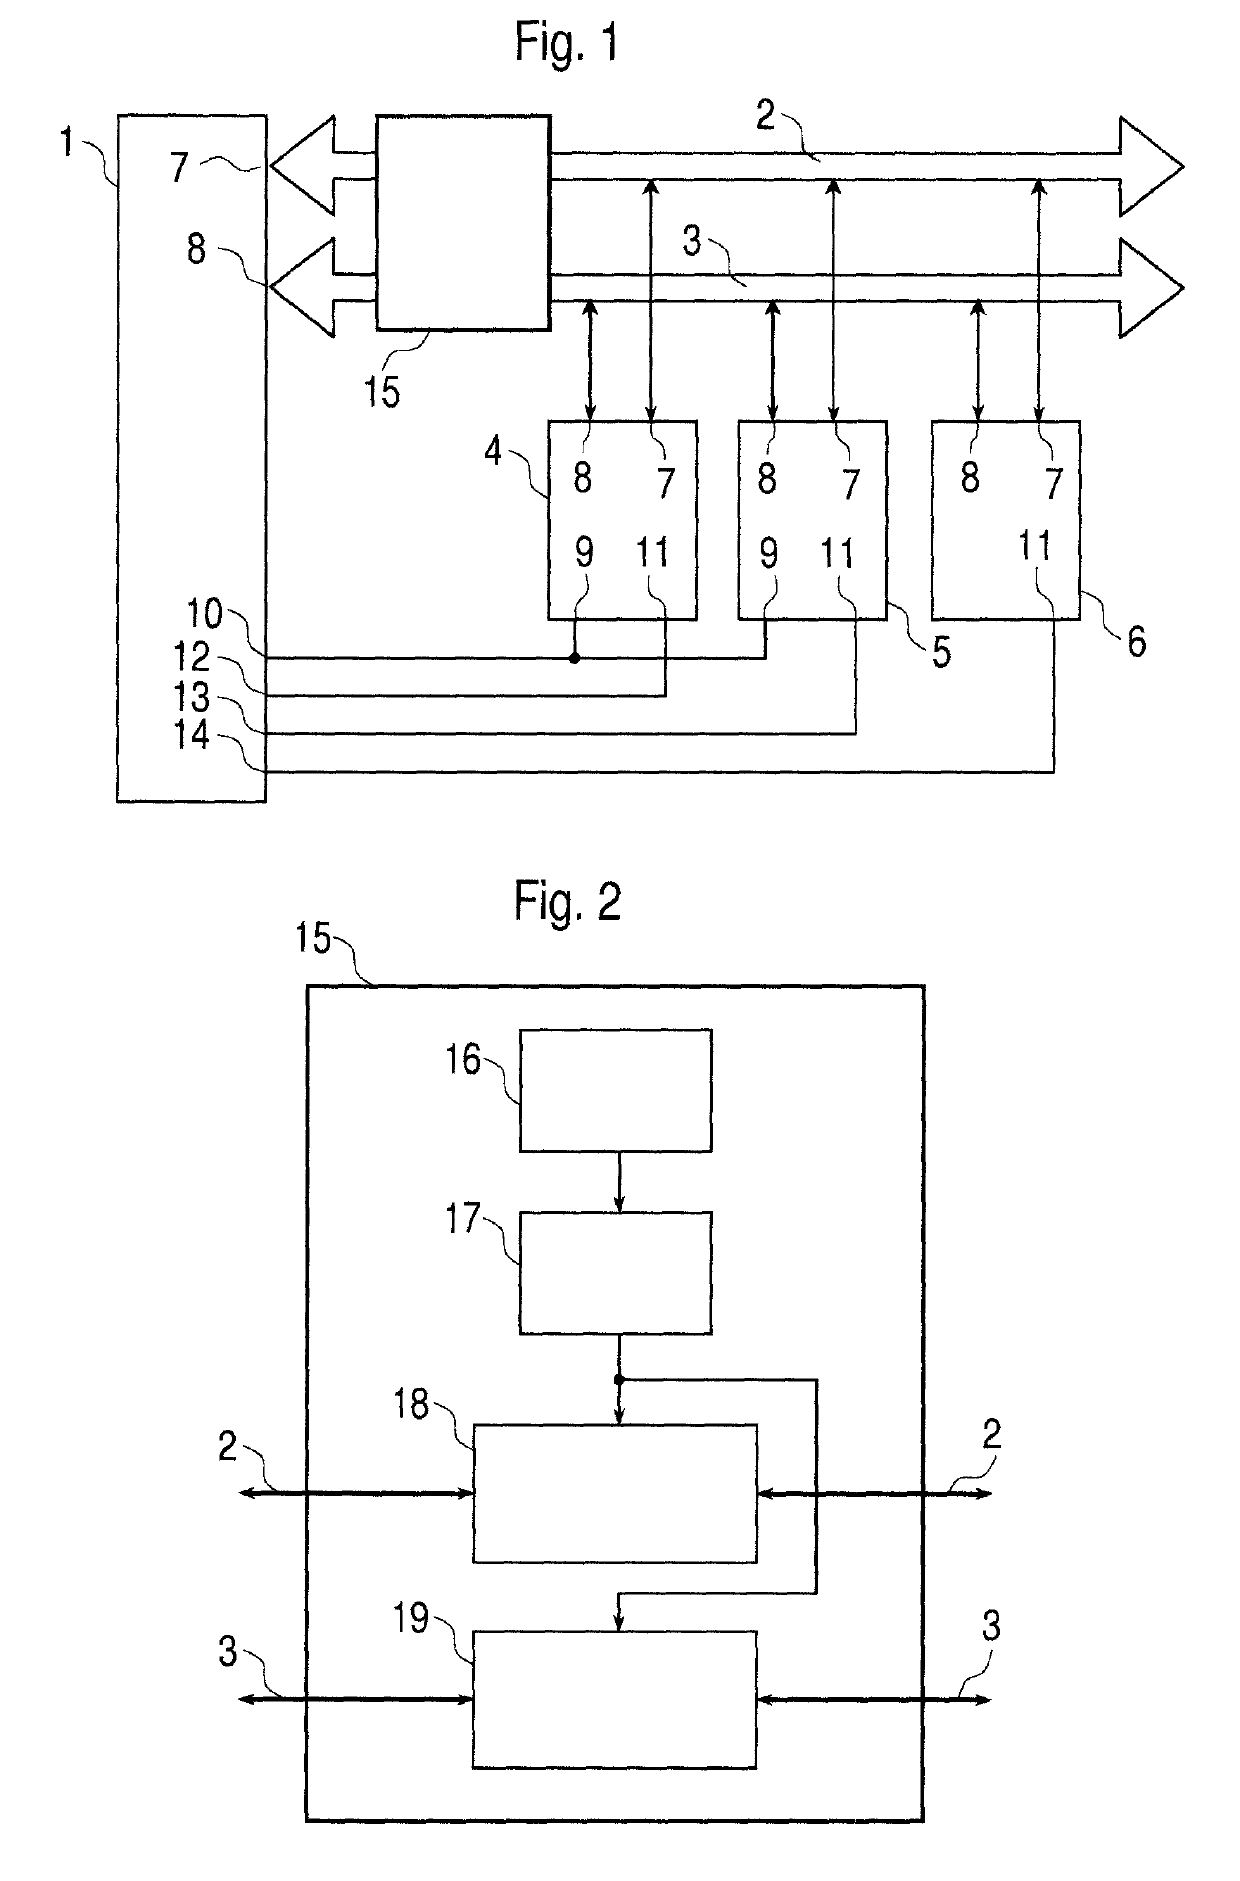 Method of writing data to a memory device and reading data from the memory device